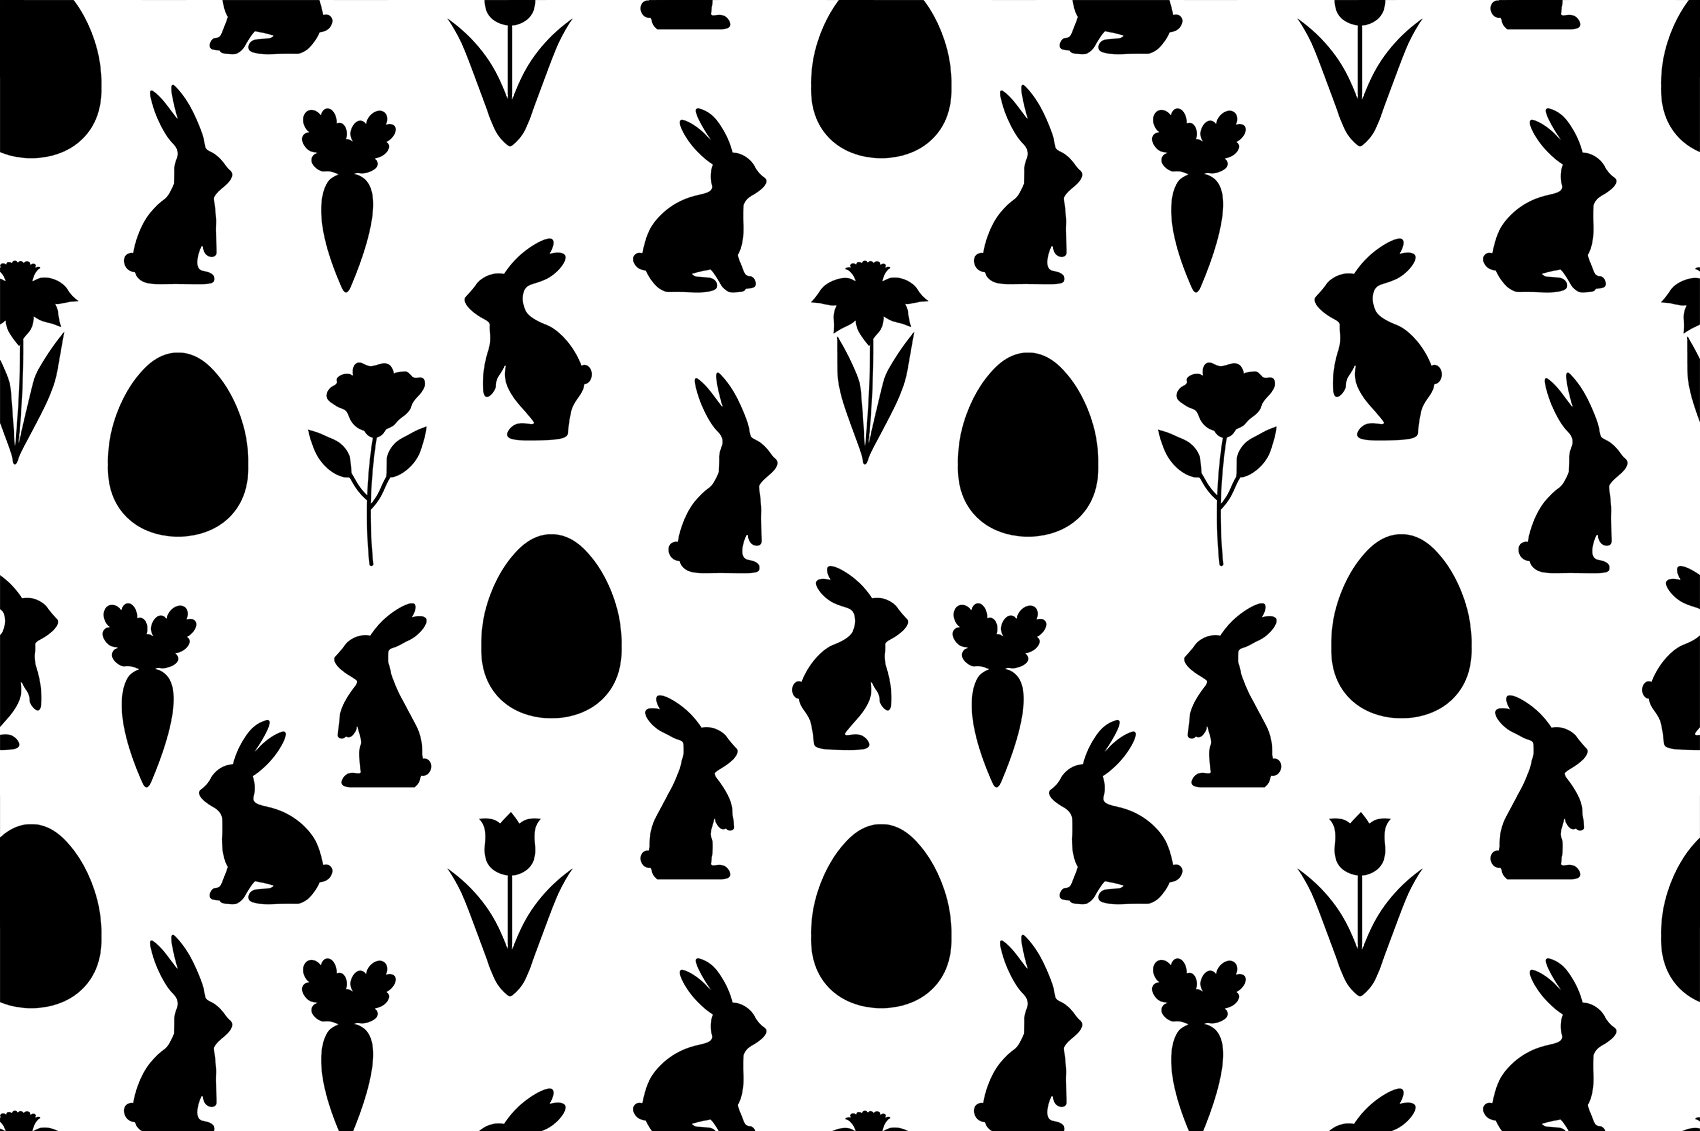 Bunnies and eggs set.